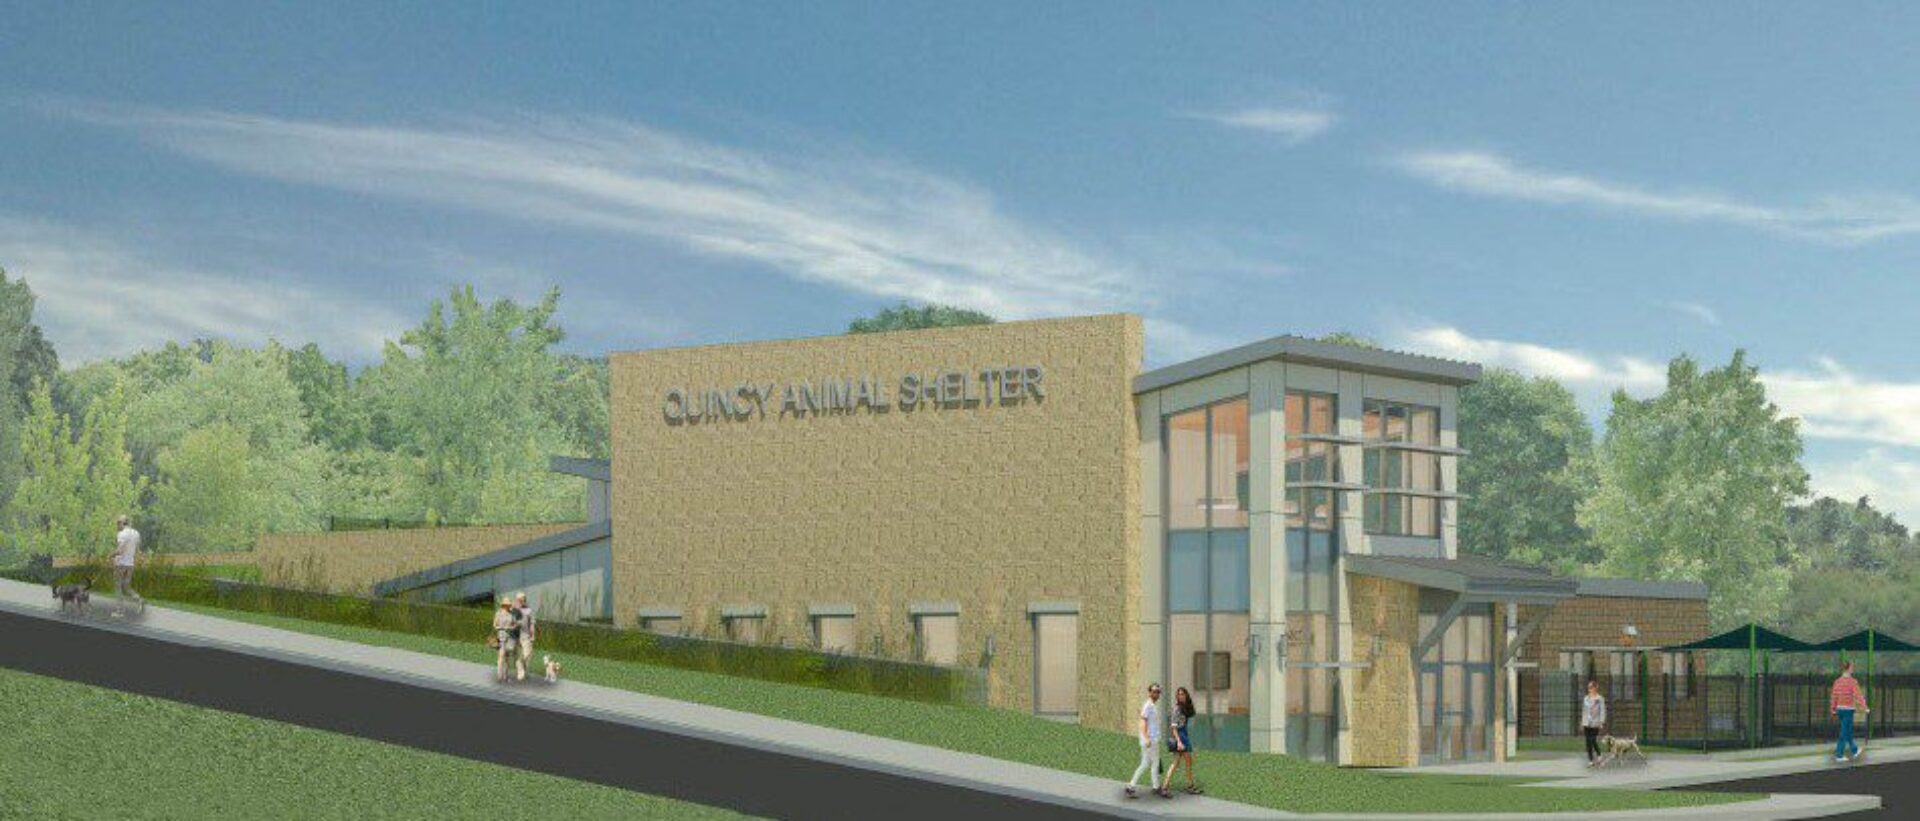 City of Quincy Animal Shelter